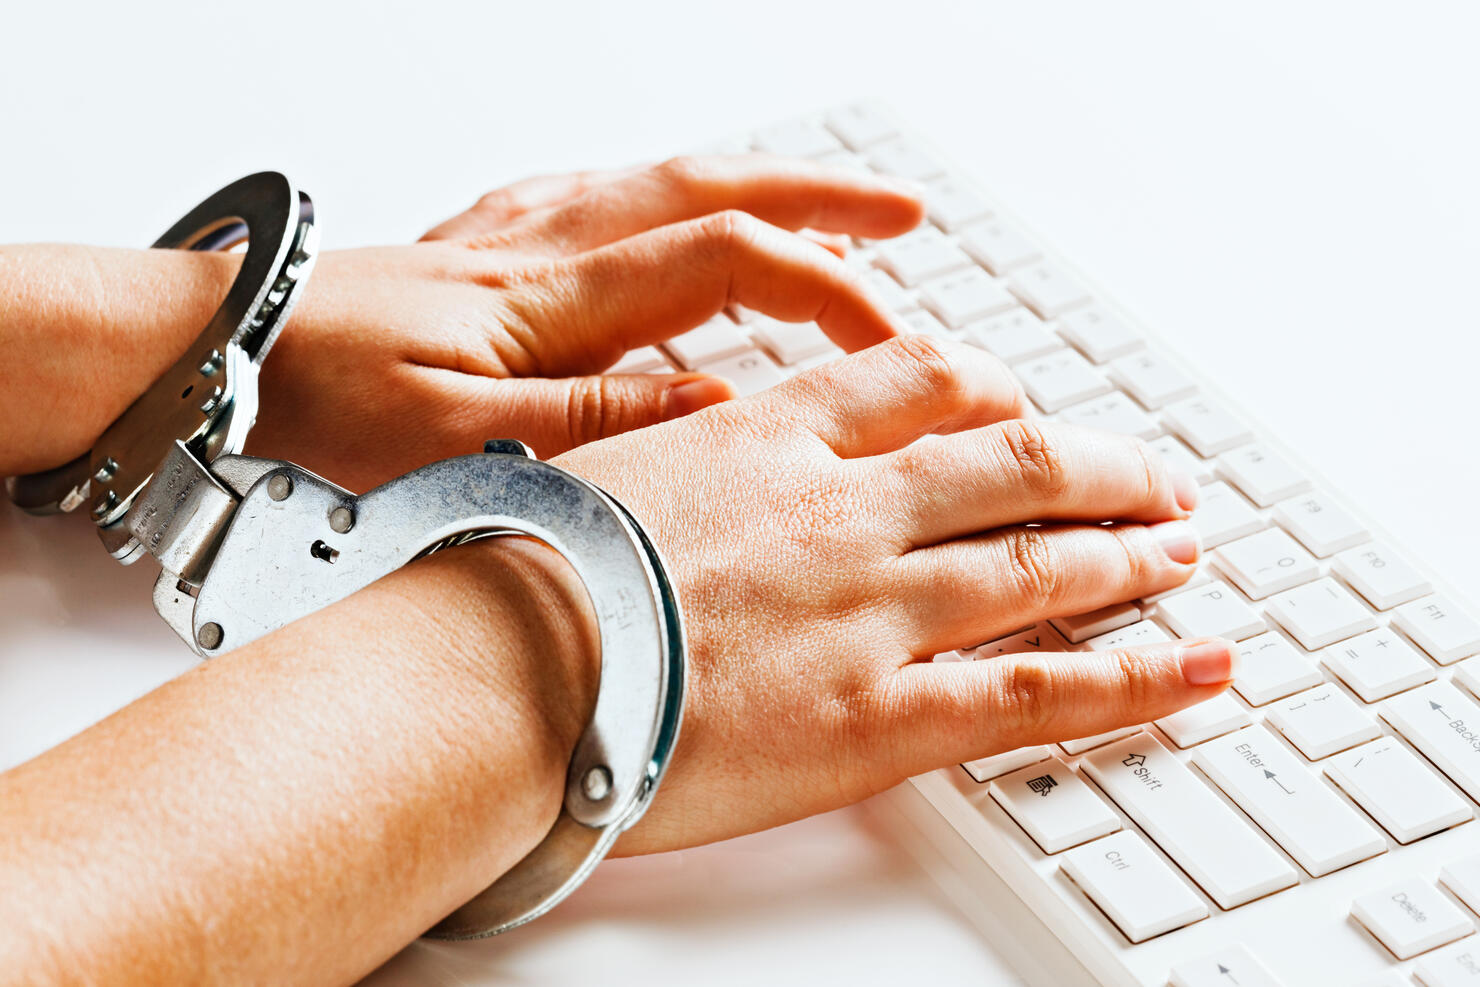 Hands tied unable to write freely on computer in handcuffs